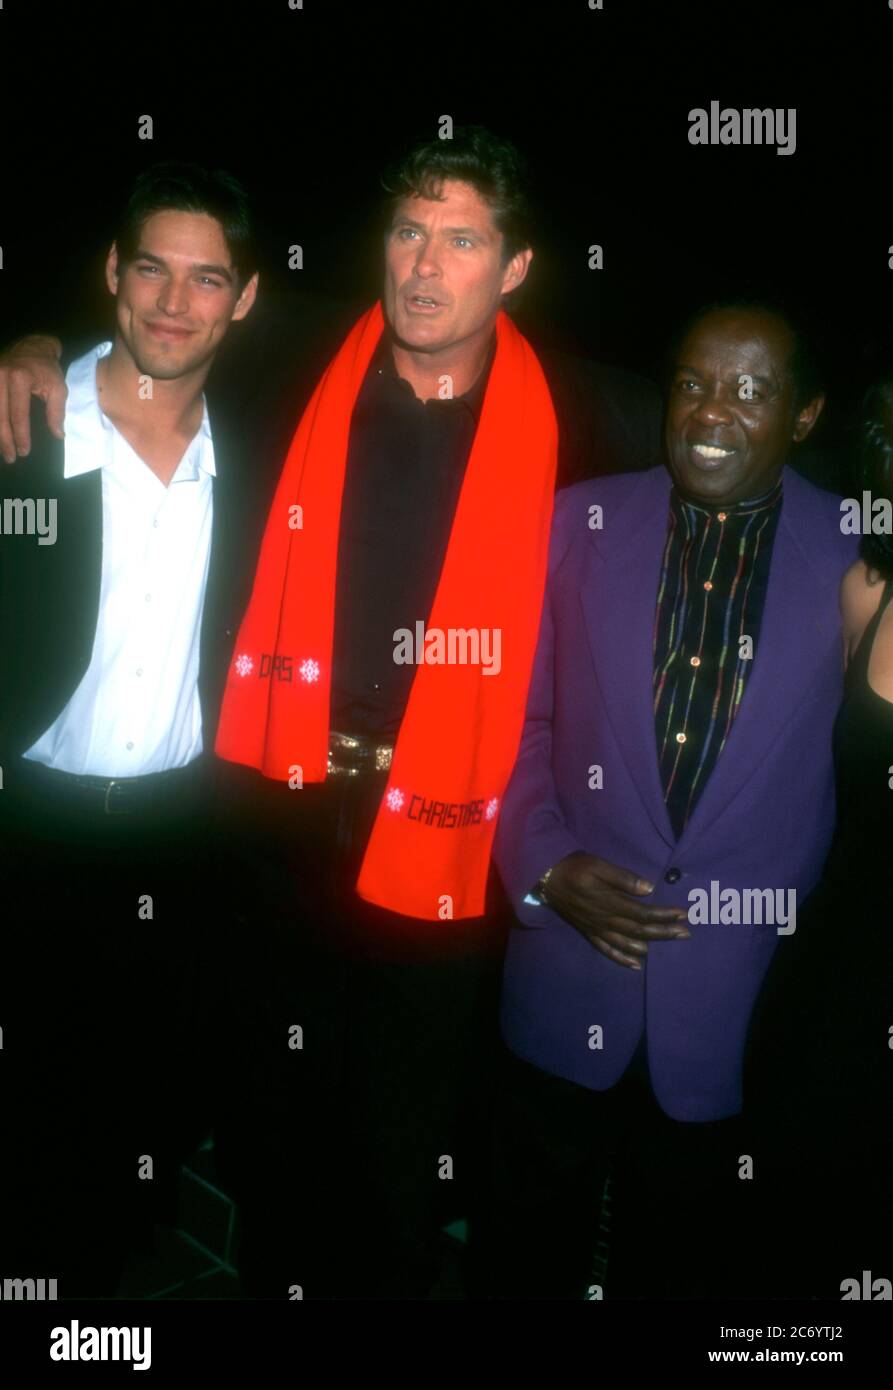 Universal City, California, USA 15th December 1995 (L-R) Actor Eddie Cibrian, actor David Hasselhoff and singer Lou Rawls attend Baywatch & Baywatch Nights Holiday Party on December 15, 1995 at B.B. King's Blues Club in Universal City, California, USA. Photo by Barry King/Alamy Stock Photo Stock Photo